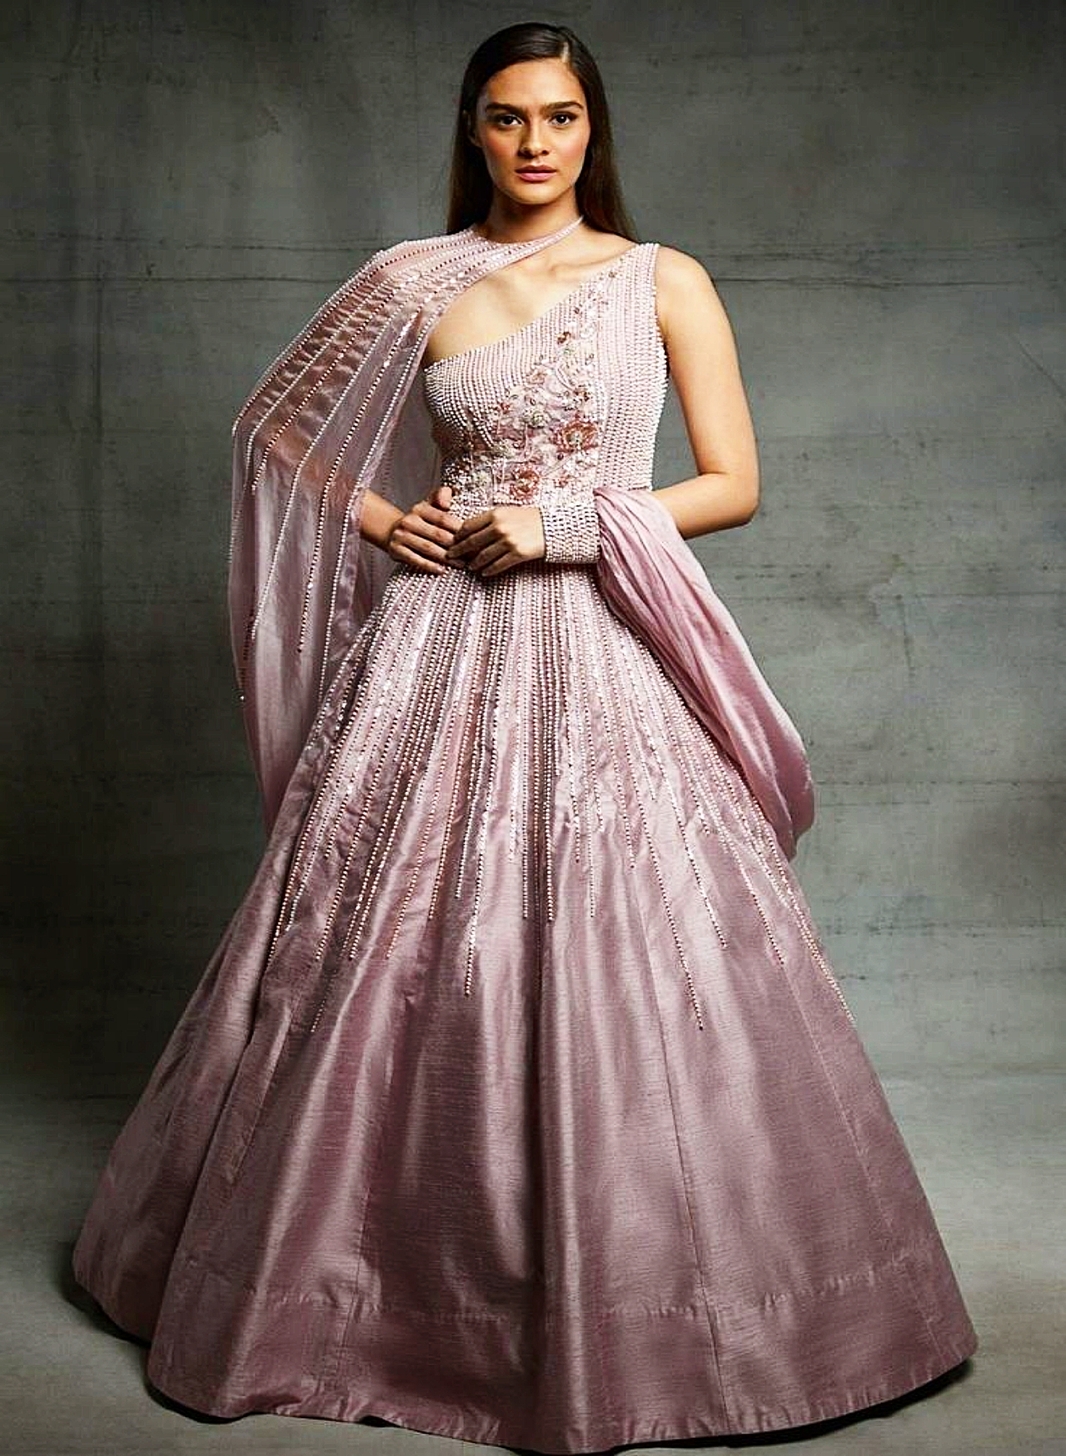 Party Gowns In Bengaluru, Karnataka At Best Price | Party Gowns  Manufacturers, Suppliers In Bangalore